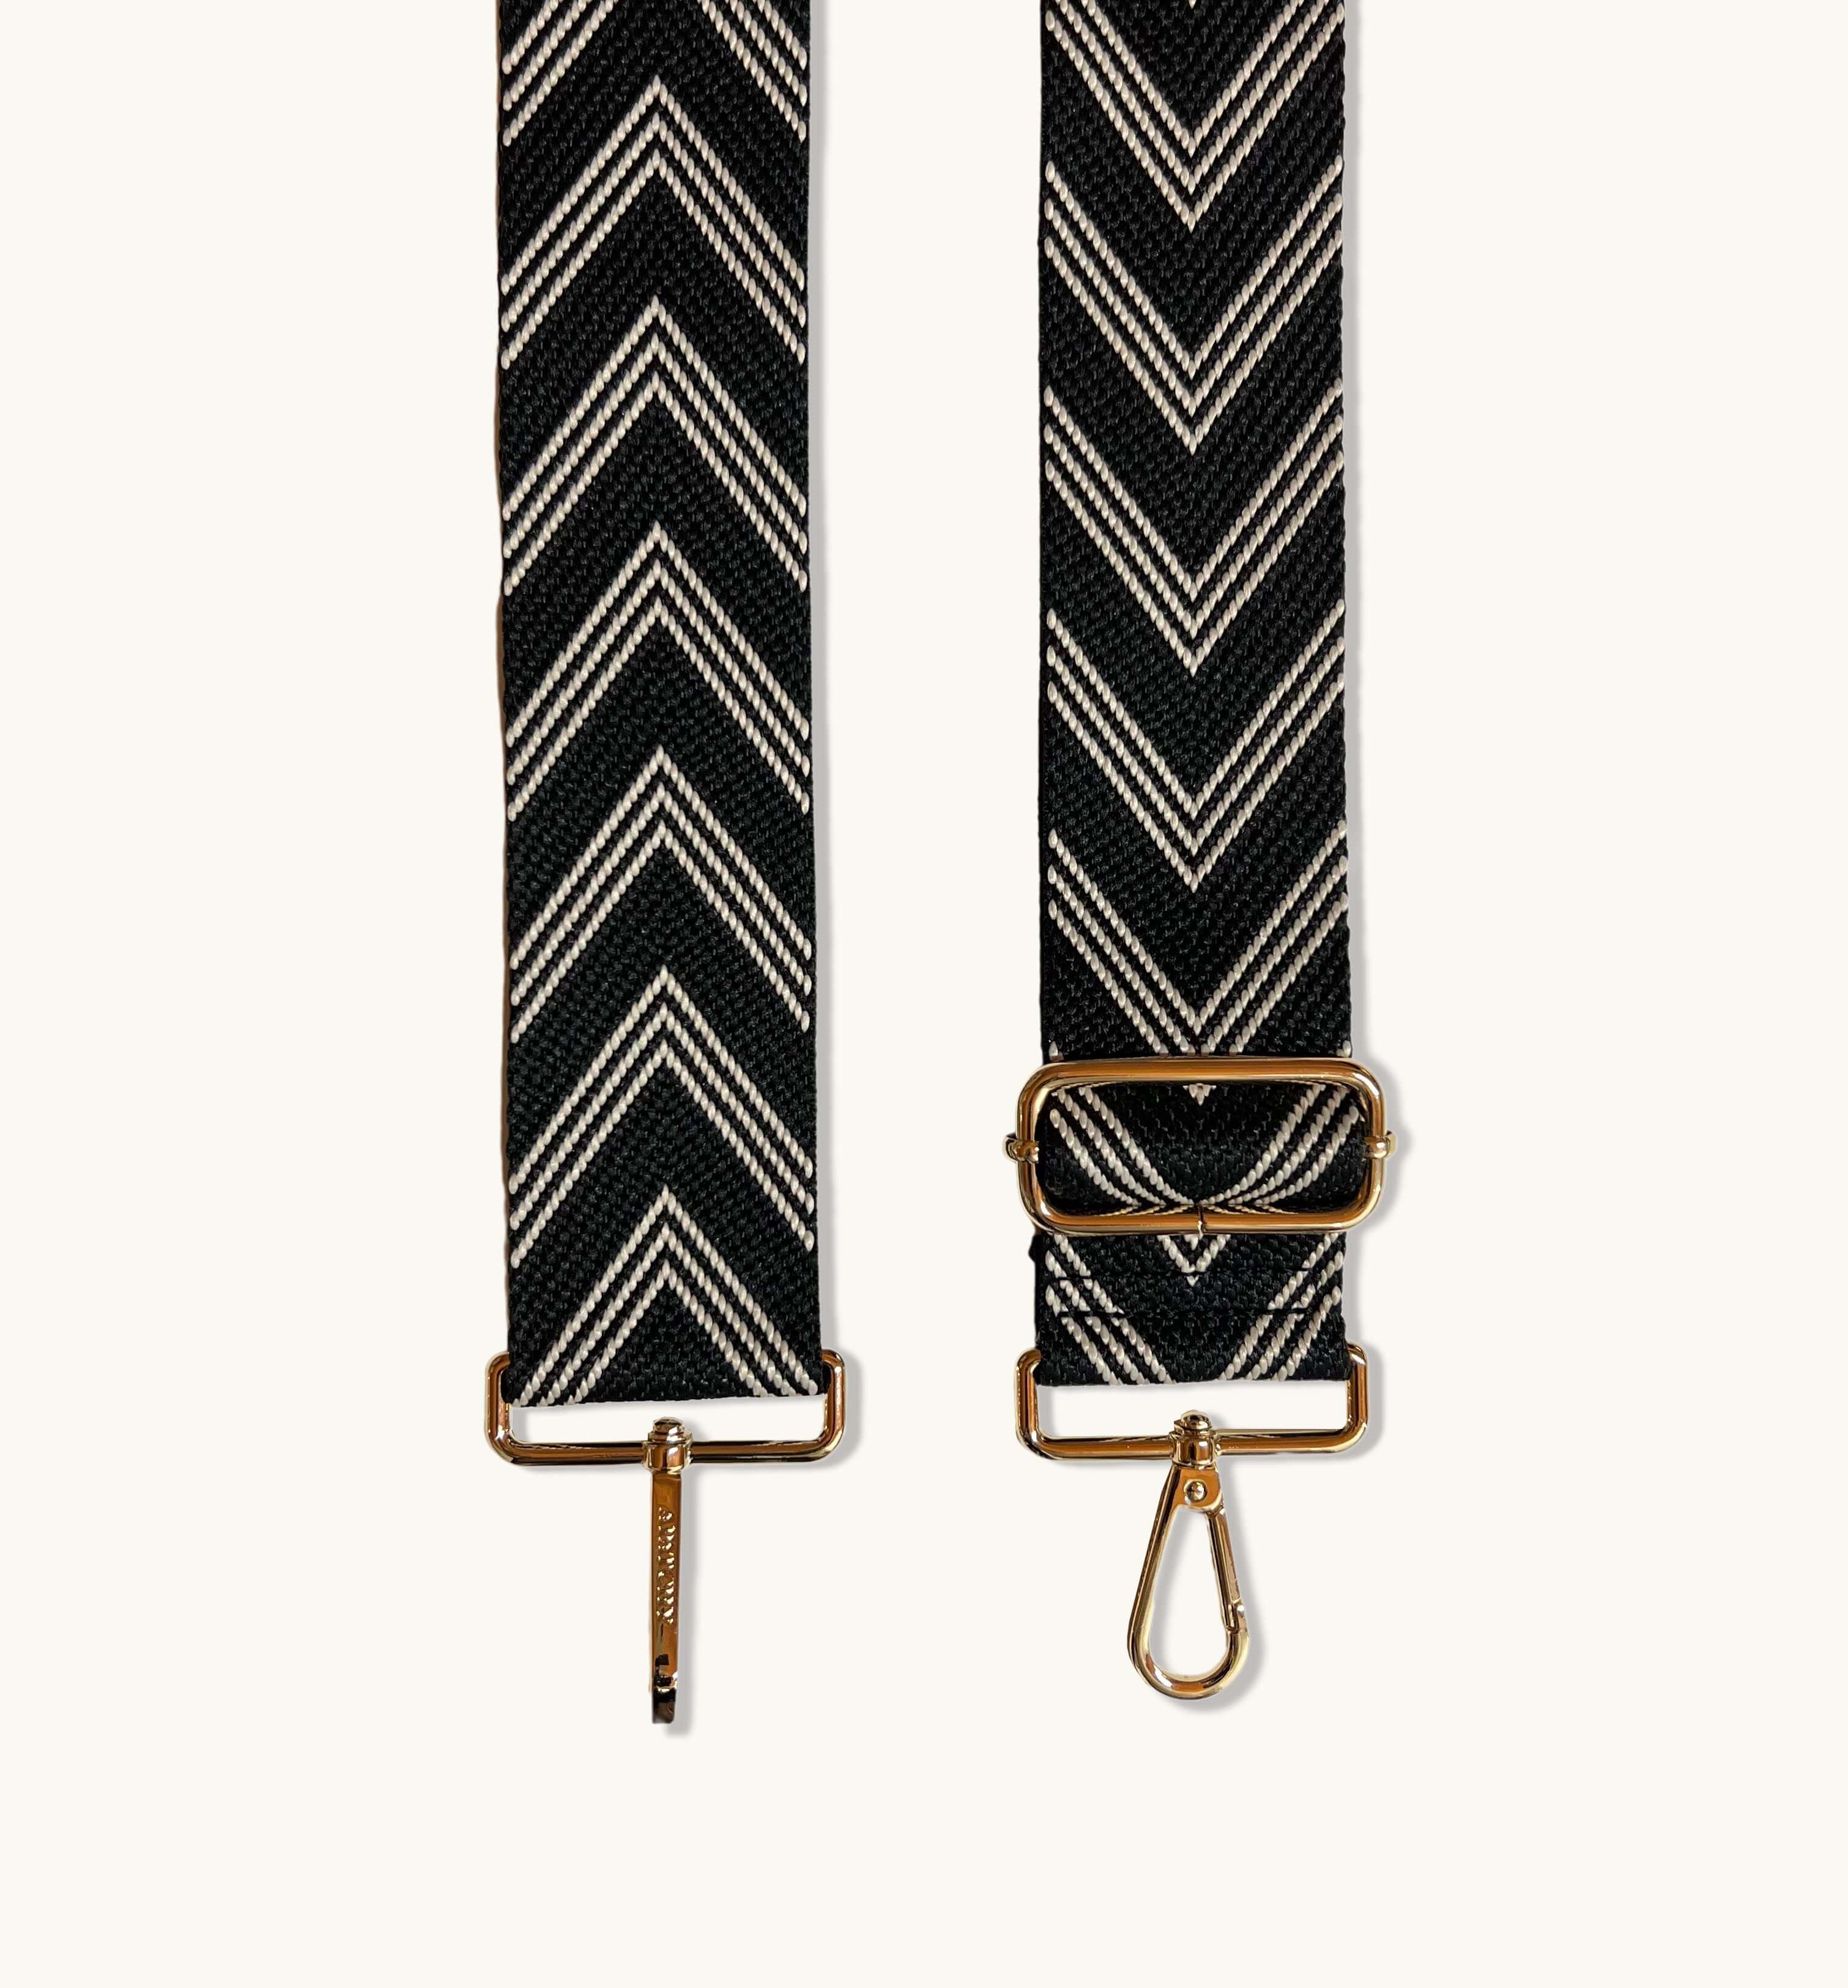 Apatchy Black and Stone Arrow Strap